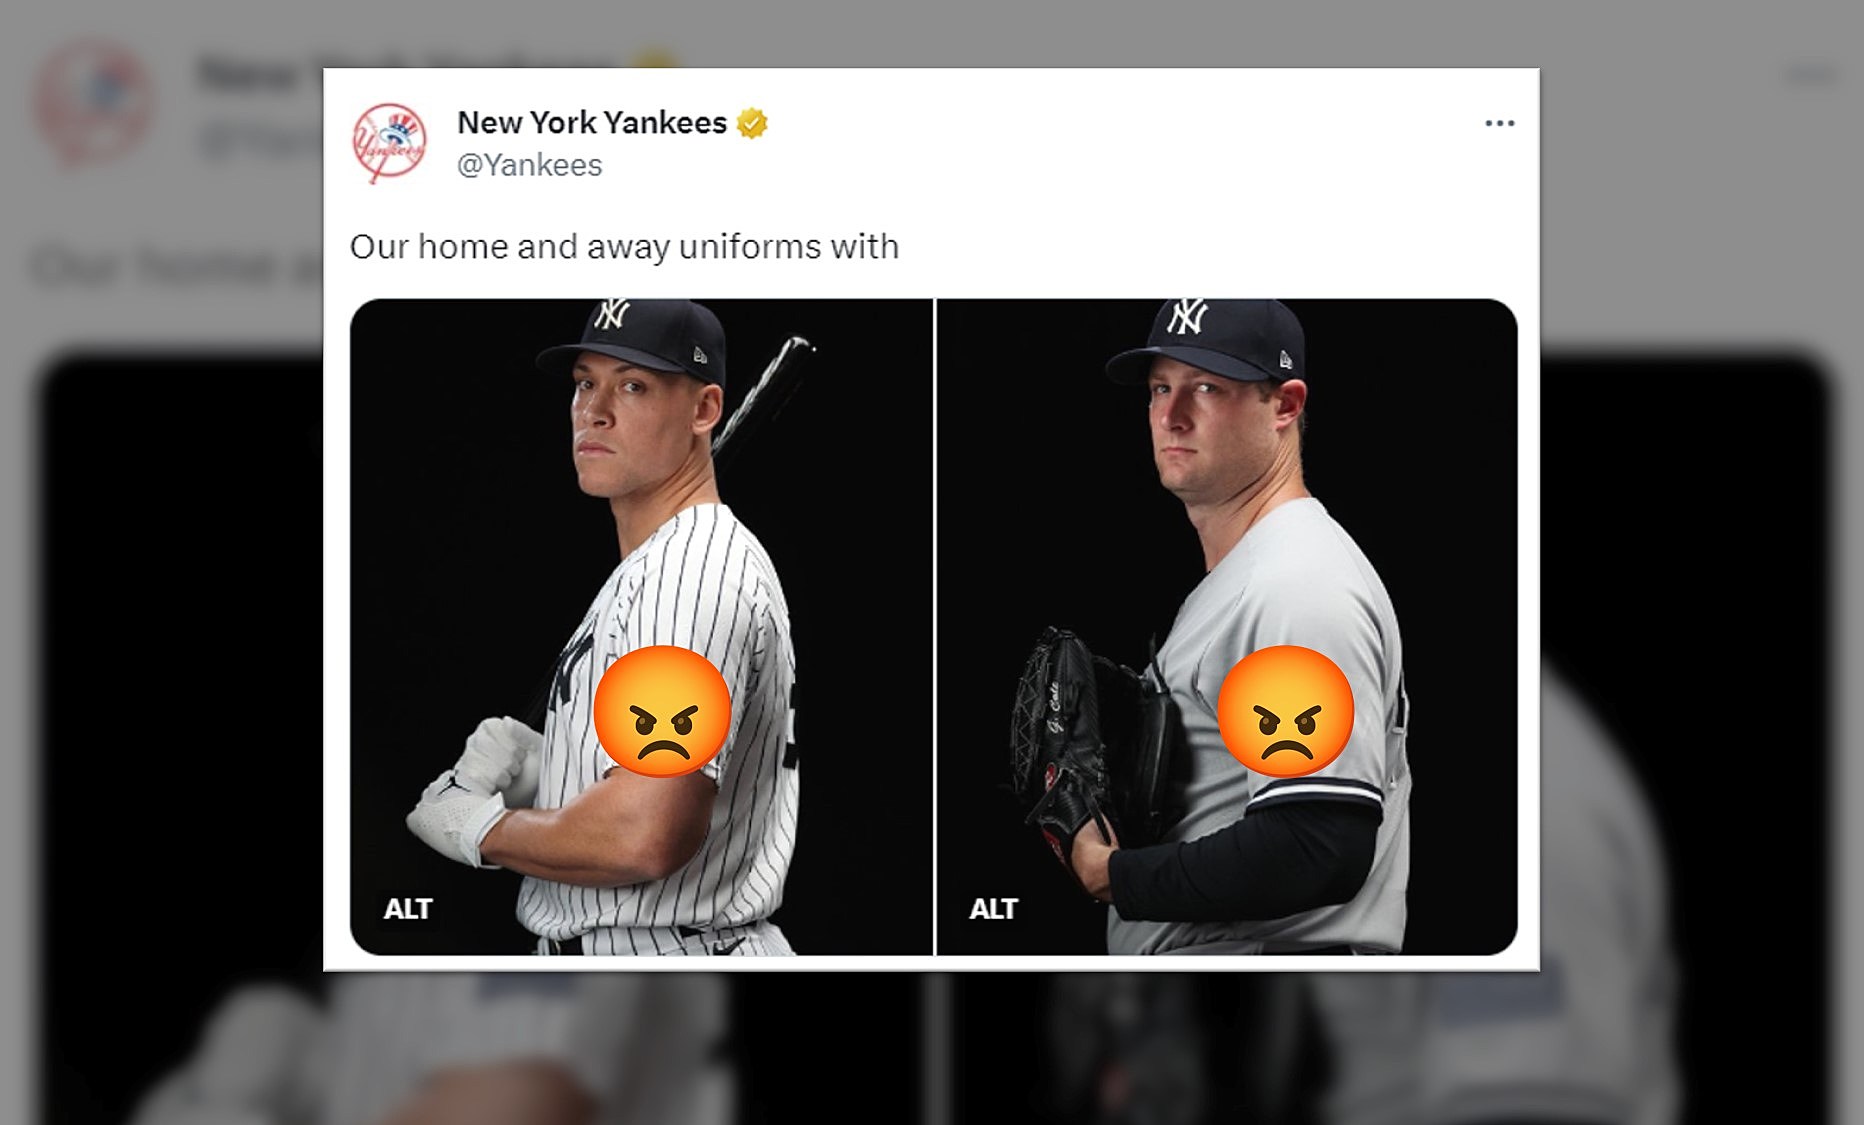 What do you want to see in the Yankees' City Connect uniforms? : r/NYYankees